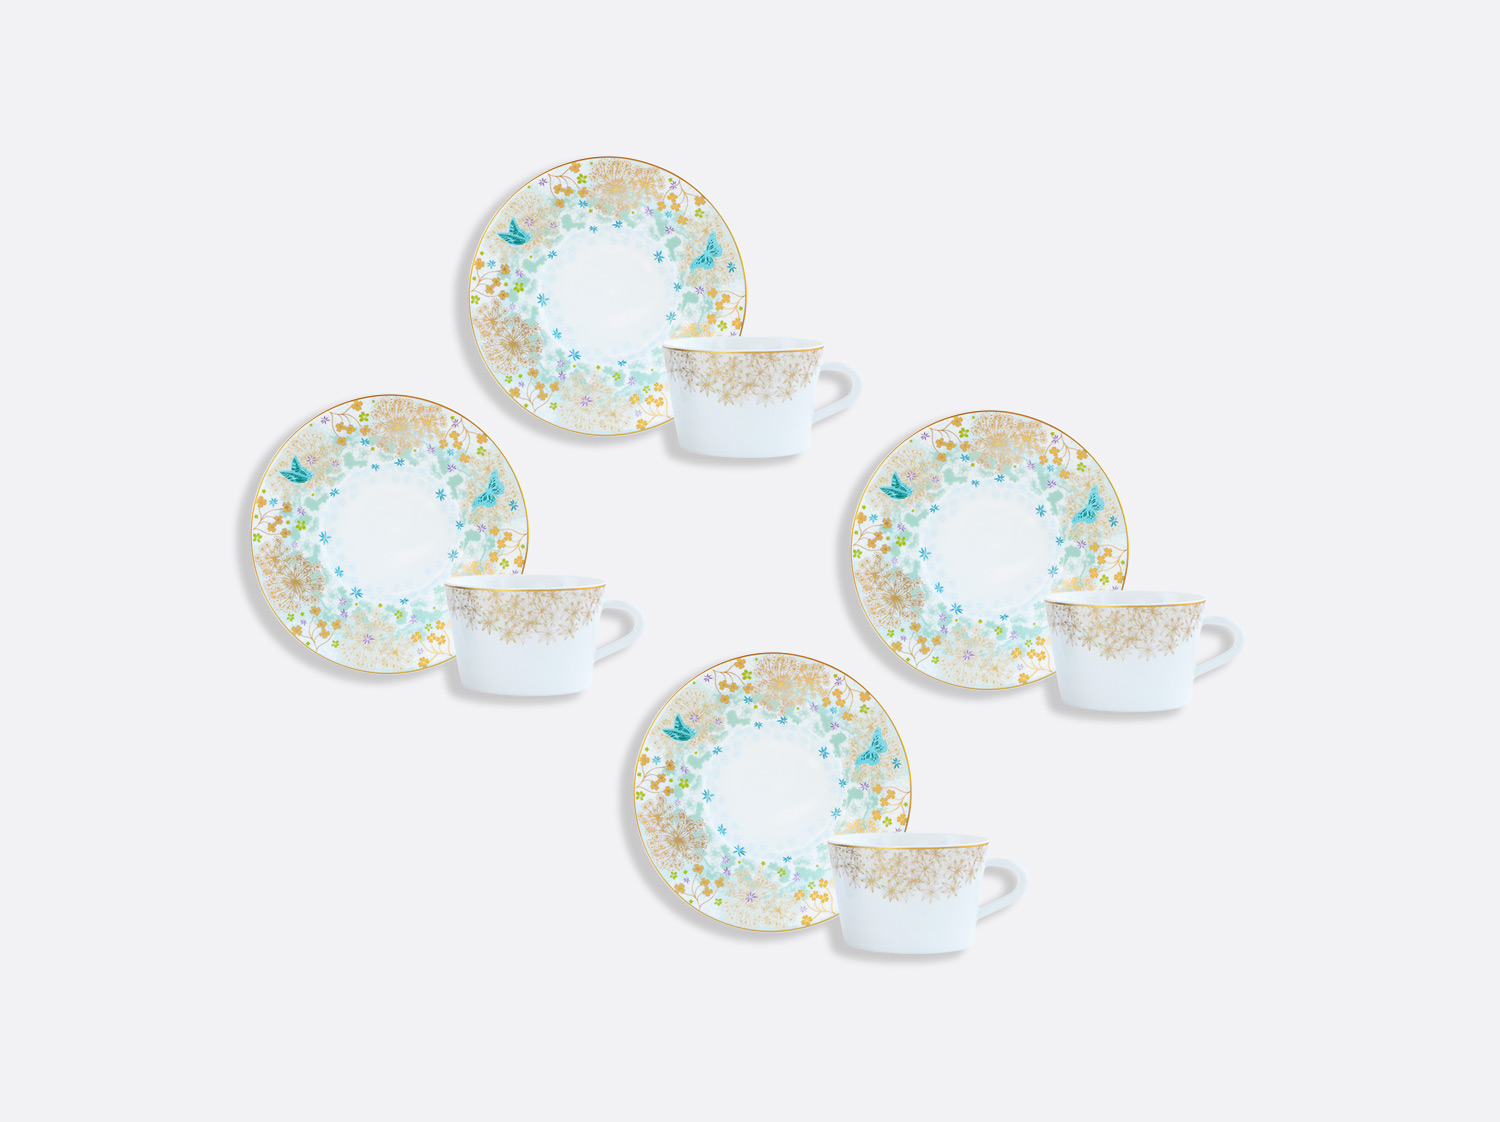 China Tea cup and saucer gift box - 5 Oz - Set of 4 of the collection FÉERIE - MICHAËL CAILLOUX | Bernardaud